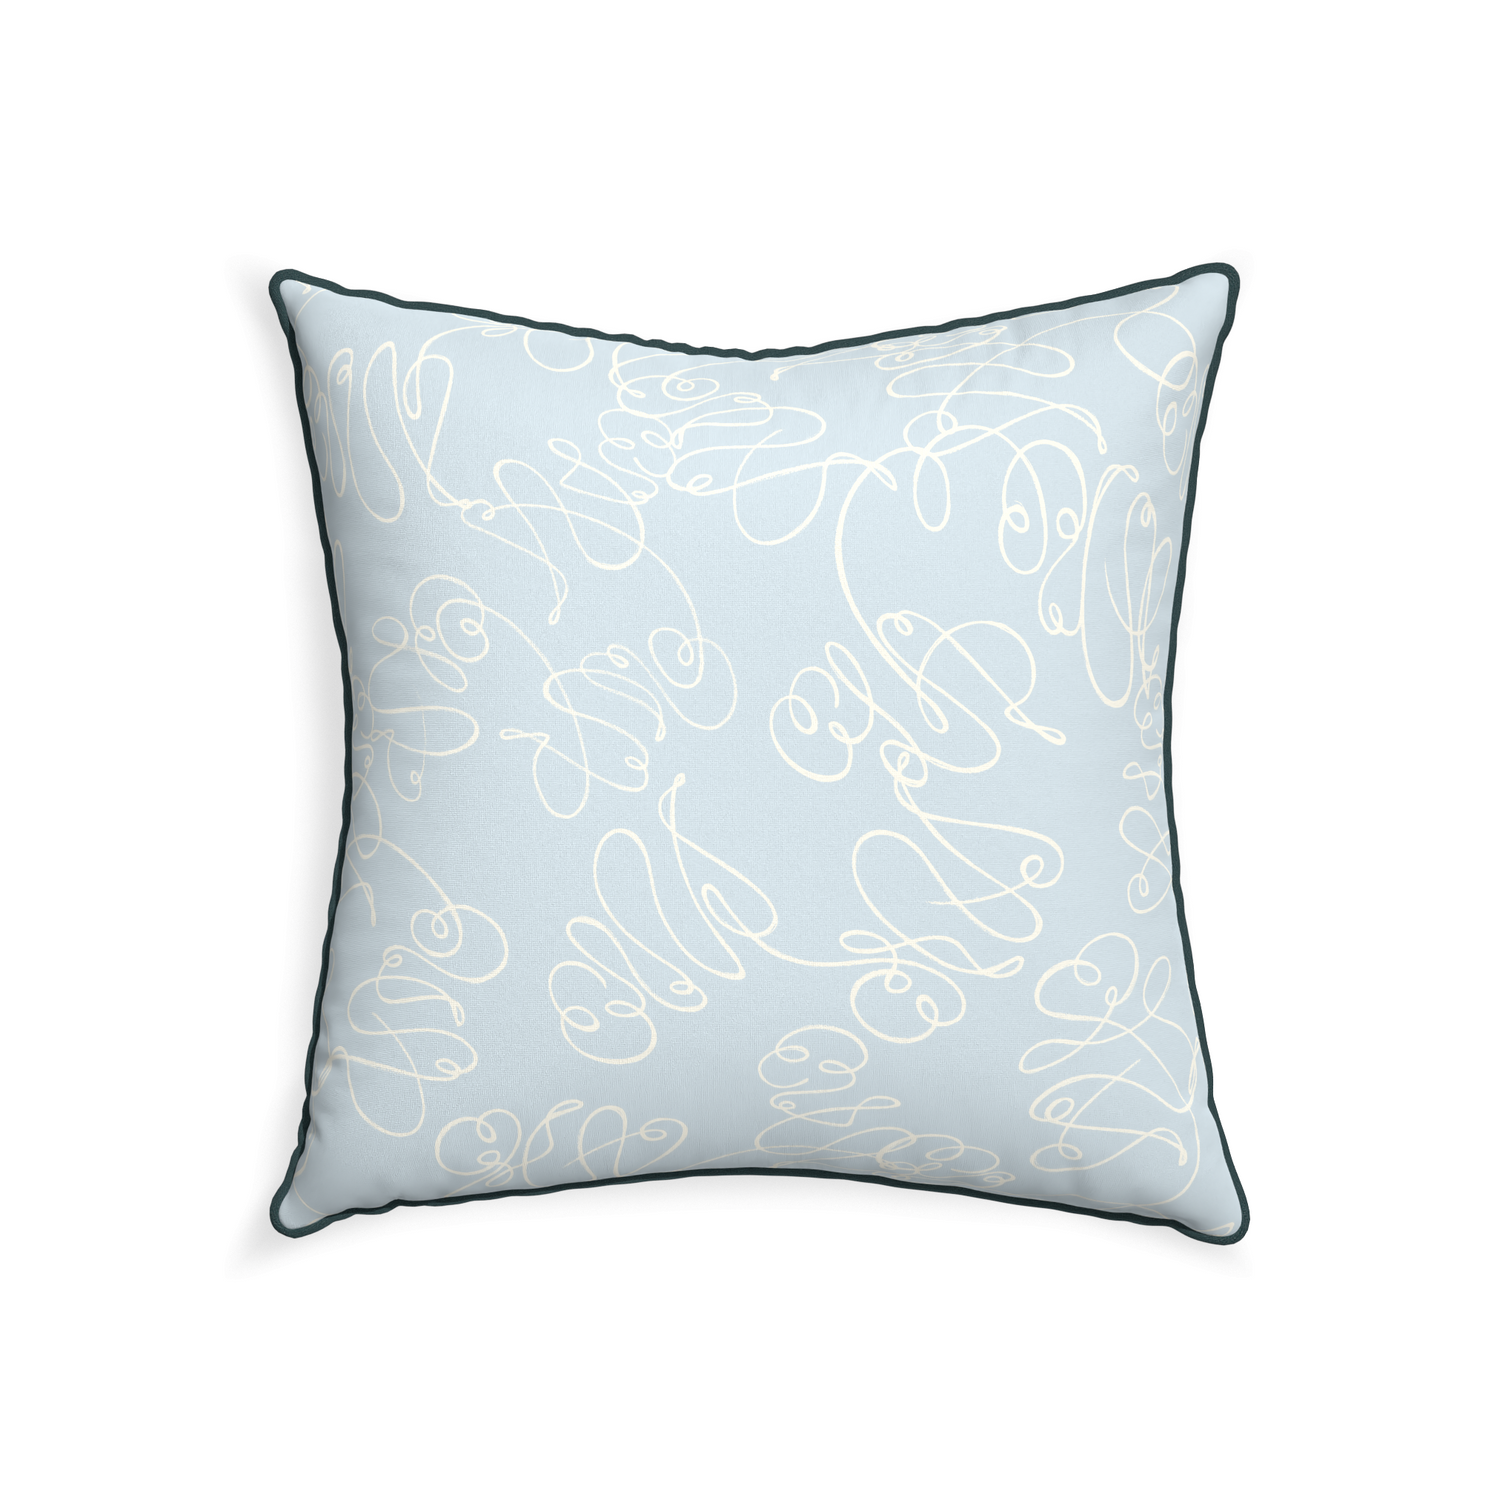 22-square mirabella custom powder blue abstractpillow with p piping on white background